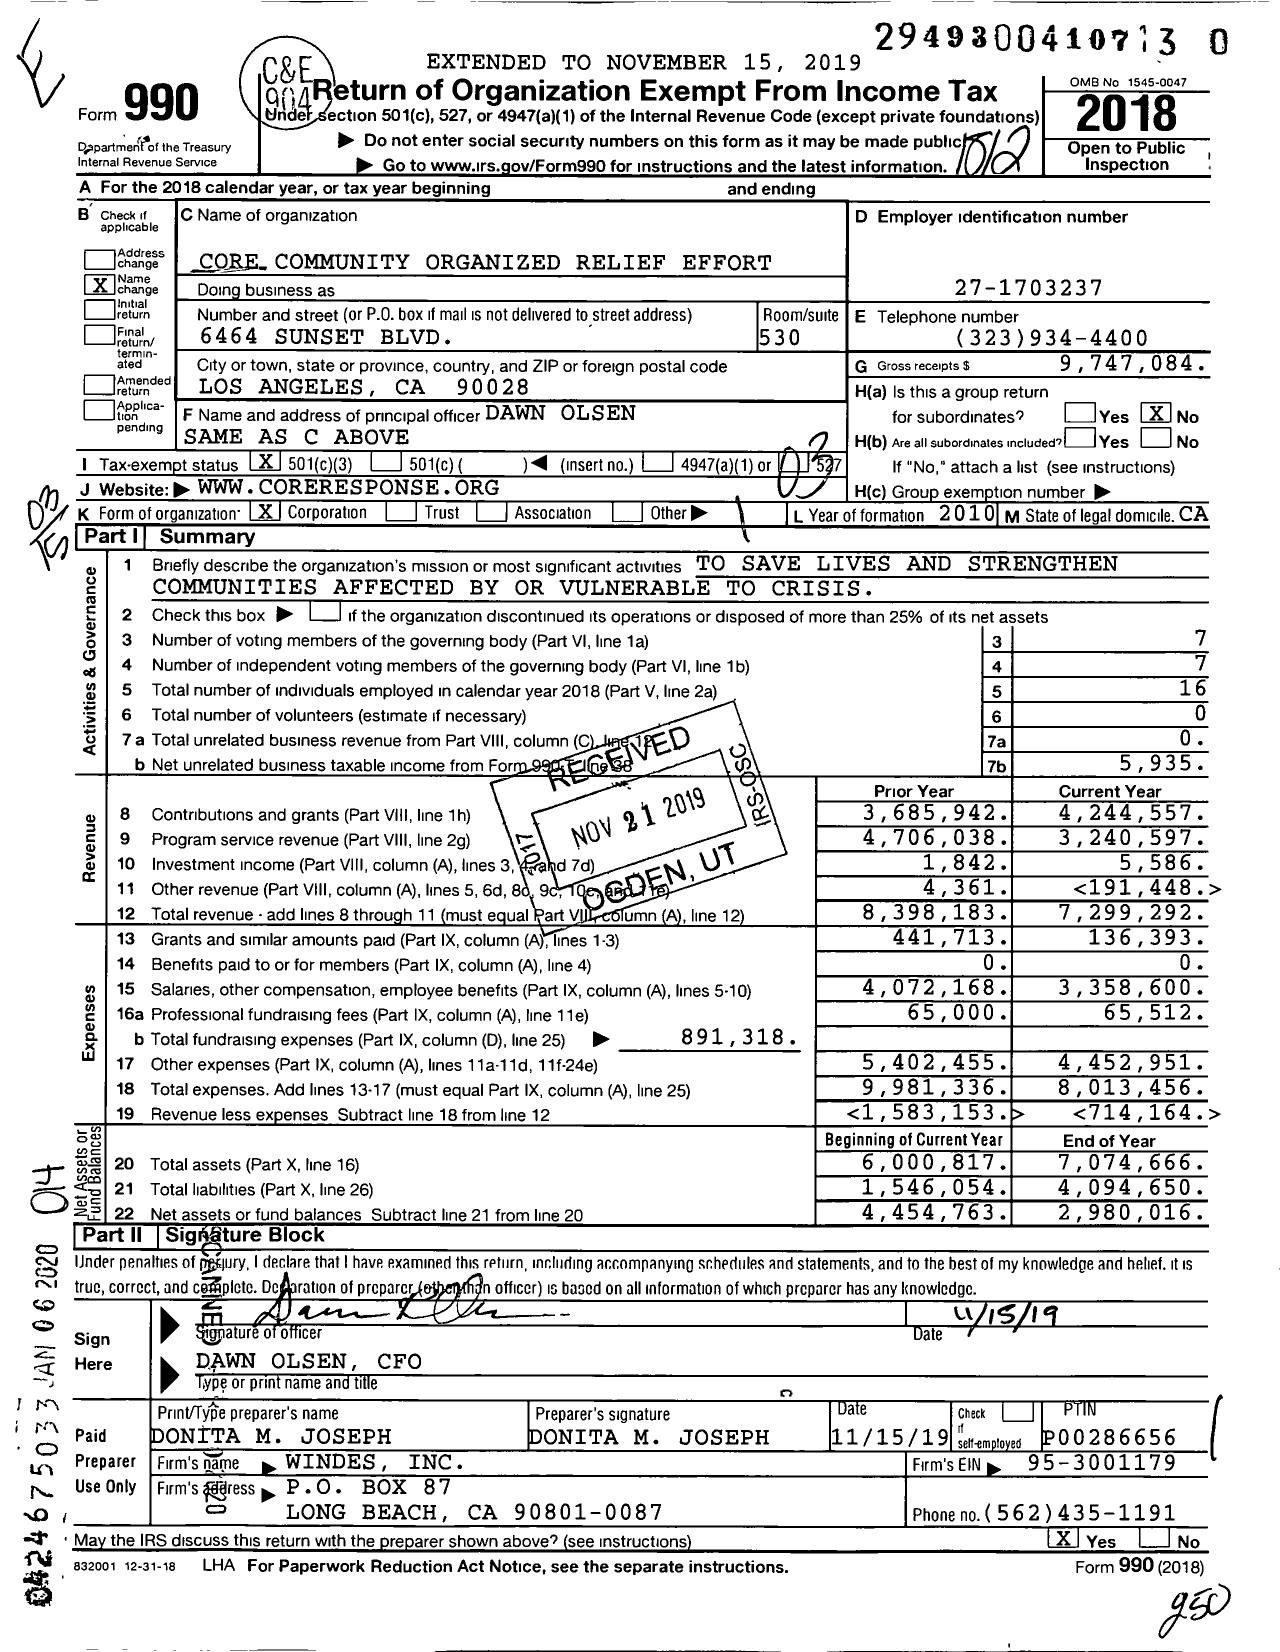 Image of first page of 2018 Form 990 for Core Community Organized Relief Effort (J/P HRO)